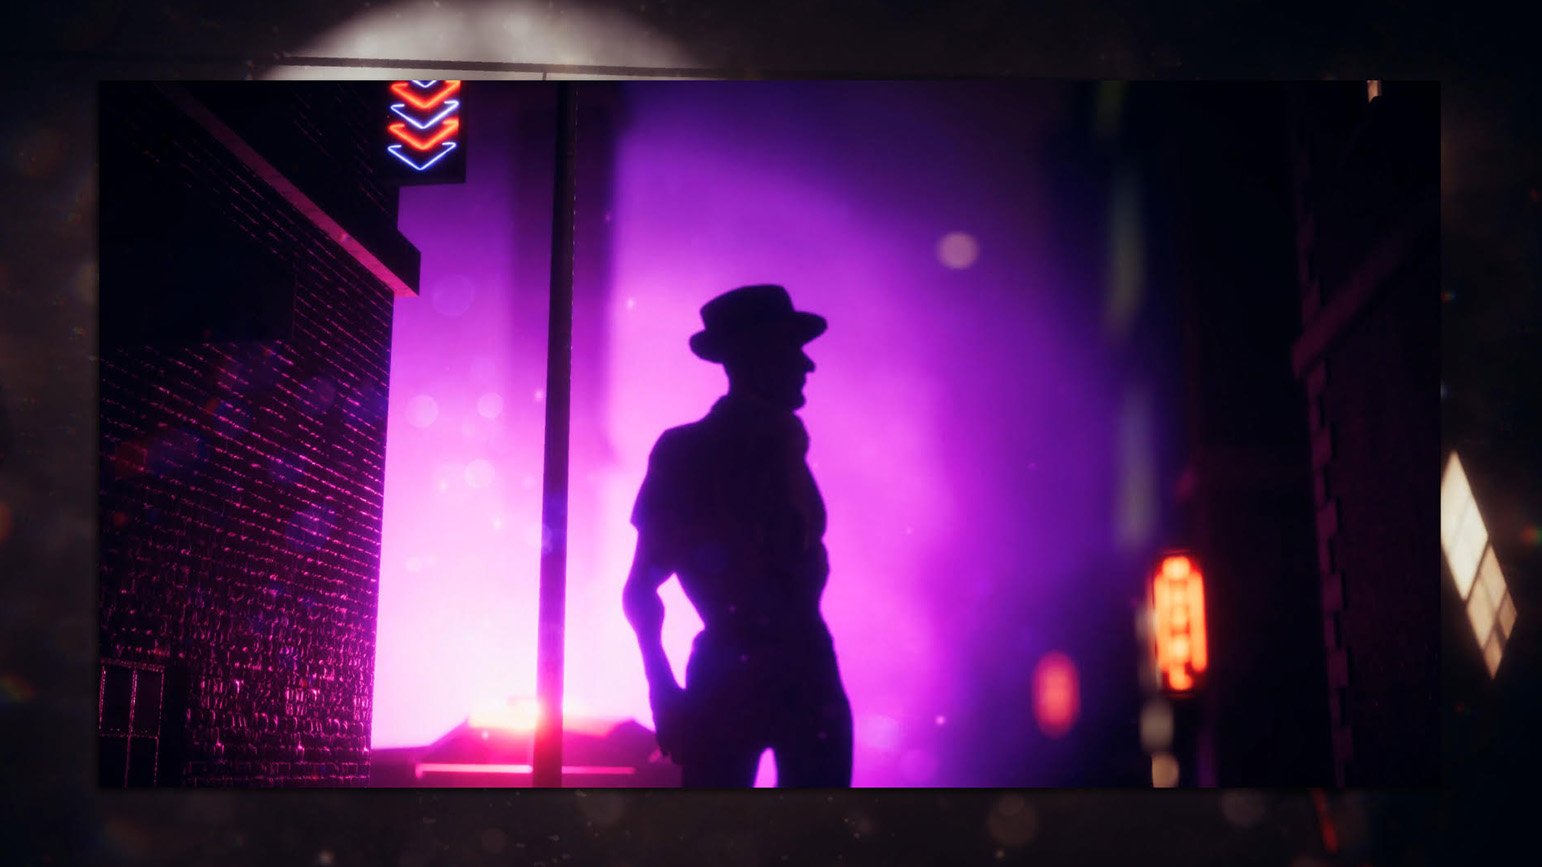 Still from animation showing a black silhouette on a dark city street